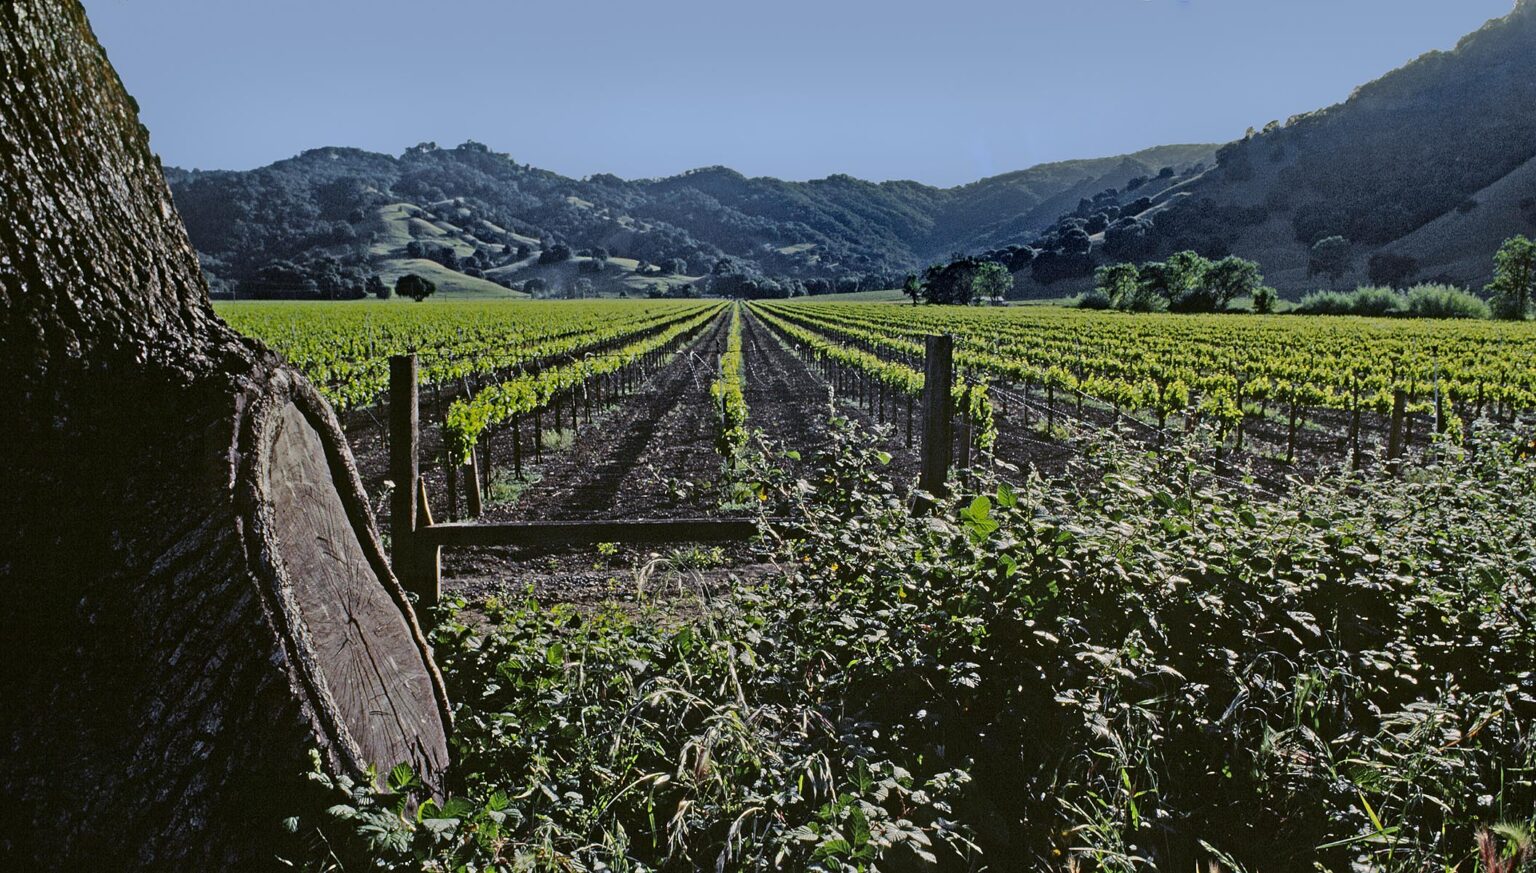 Rows of GRAPE VINES blanket the valley floor 'til they reach the OAK covered hills - NAPA VALLEY, CALIFORNIA